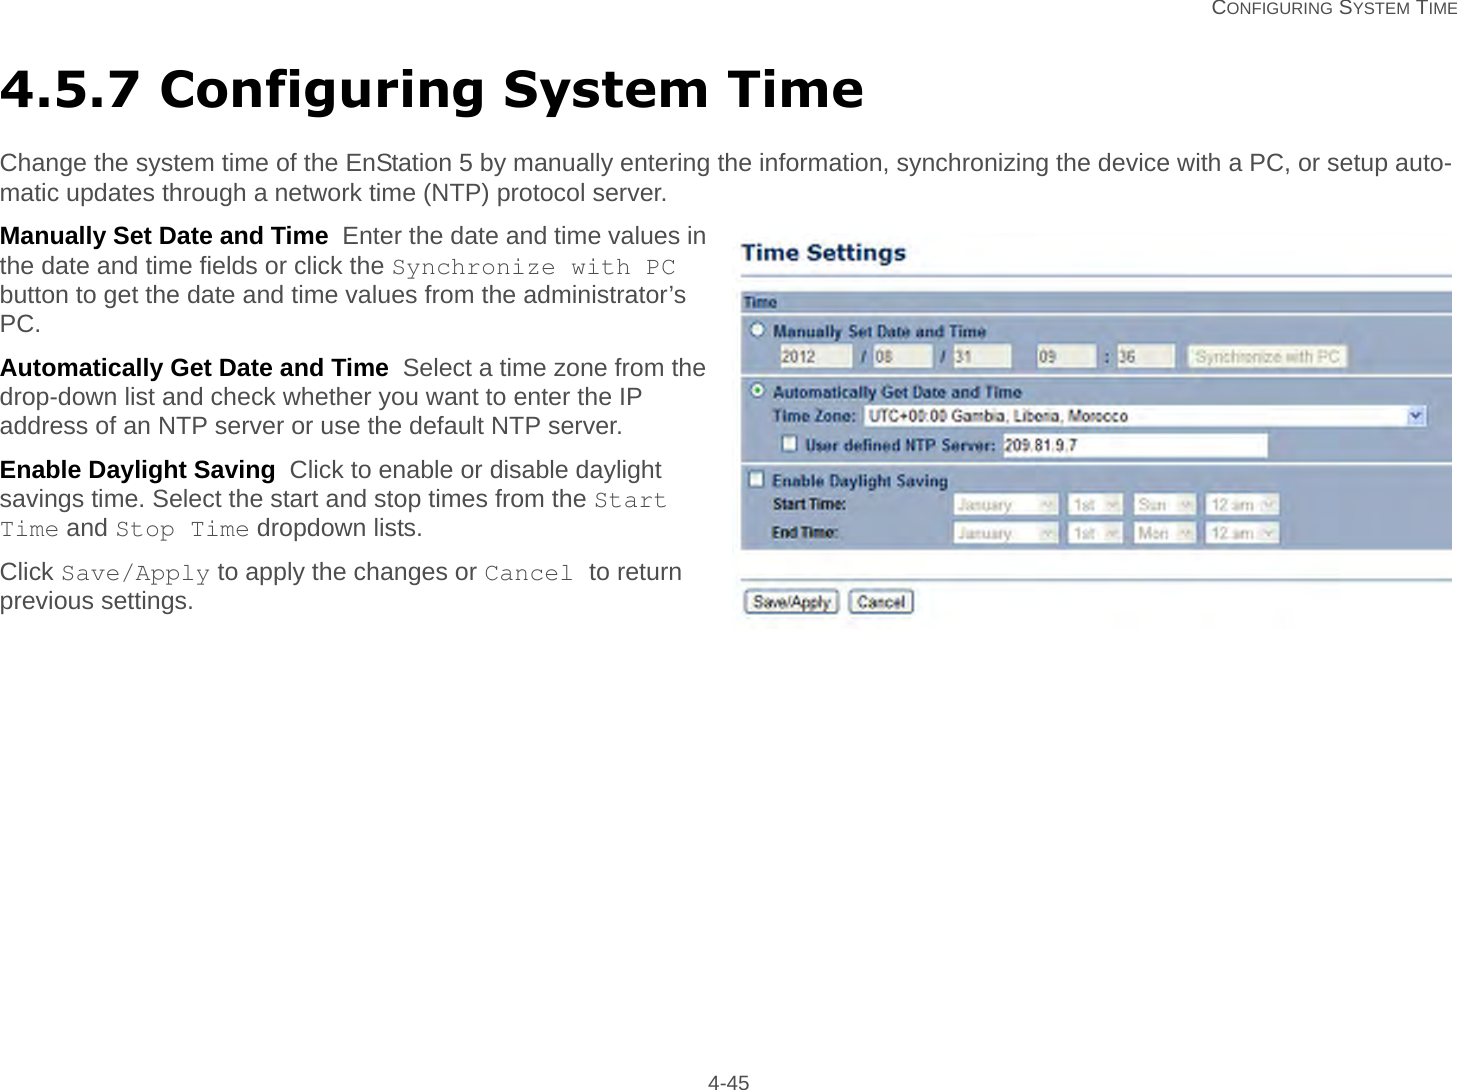   CONFIGURING SYSTEM TIME 4-454.5.7 Configuring System TimeChange the system time of the EnStation 5 by manually entering the information, synchronizing the device with a PC, or setup auto-matic updates through a network time (NTP) protocol server.Manually Set Date and Time  Enter the date and time values in the date and time fields or click the Synchronize with PC button to get the date and time values from the administrator’s PC.Automatically Get Date and Time  Select a time zone from the drop-down list and check whether you want to enter the IP address of an NTP server or use the default NTP server.Enable Daylight Saving  Click to enable or disable daylight savings time. Select the start and stop times from the Start Time and Stop Time dropdown lists.Click Save/Apply to apply the changes or Cancel to return previous settings.